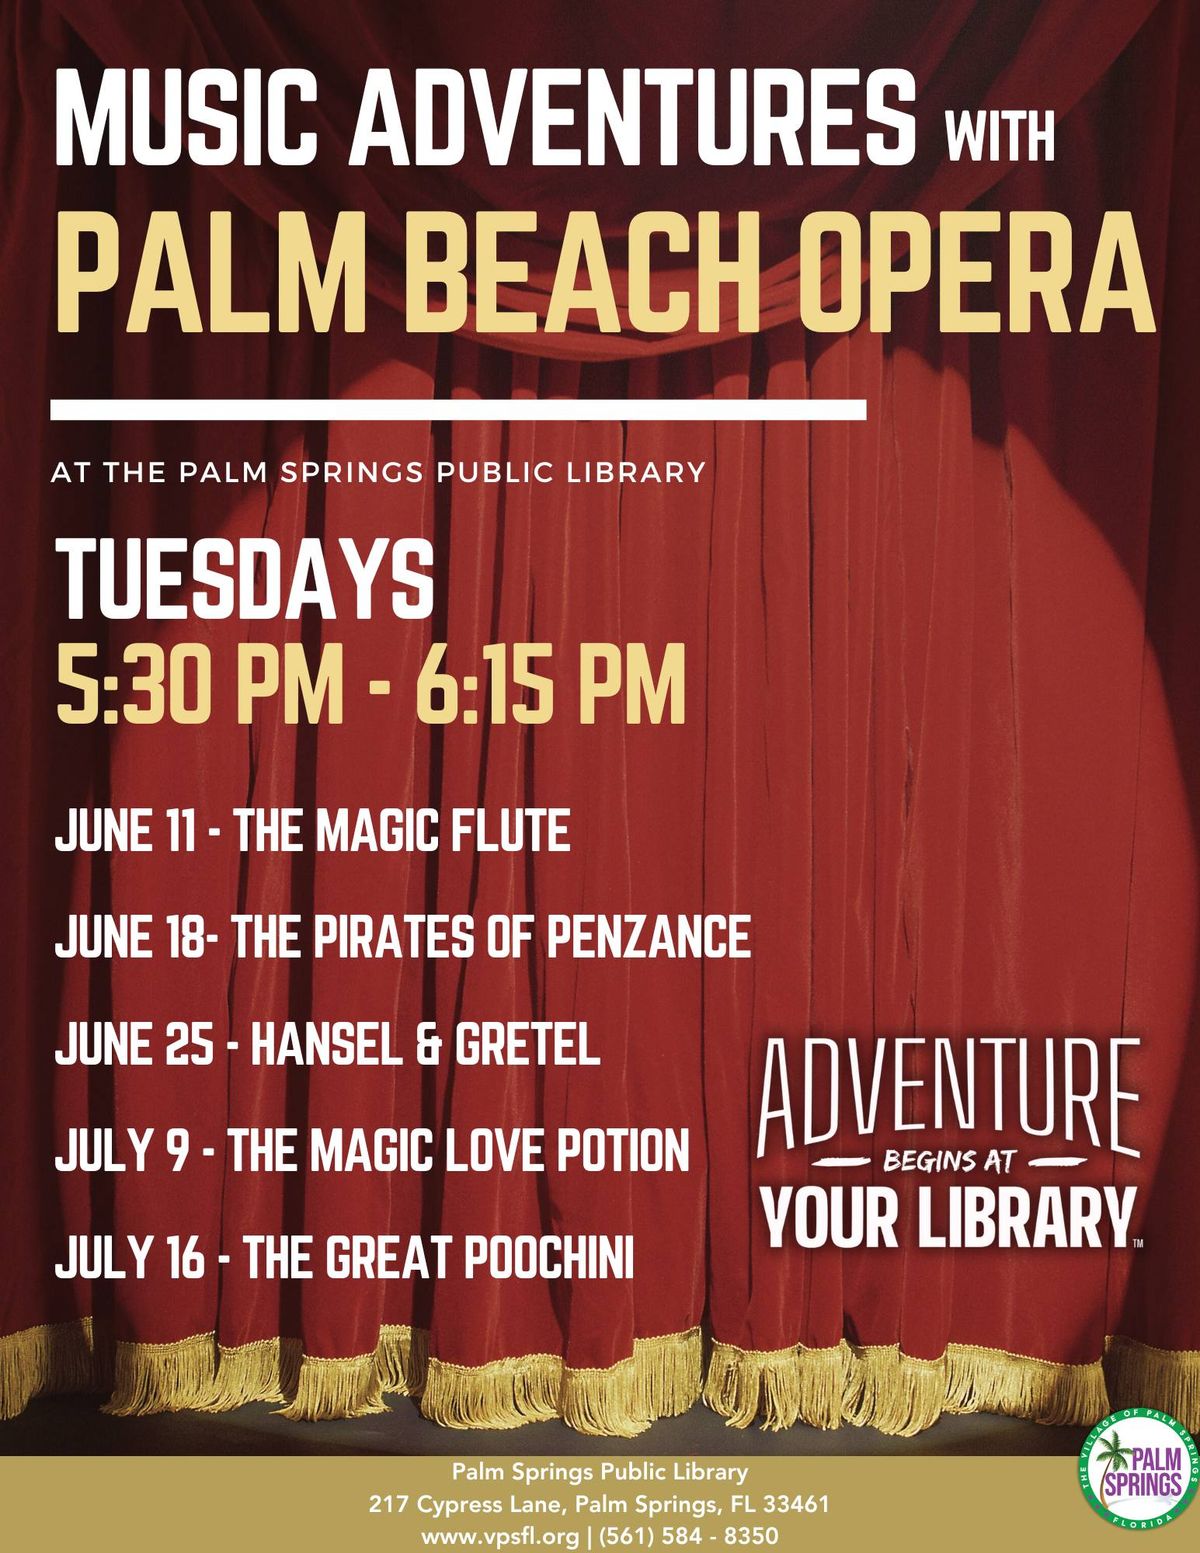 Music Adventures with the Palm Beach Opera at the Palm Springs Library